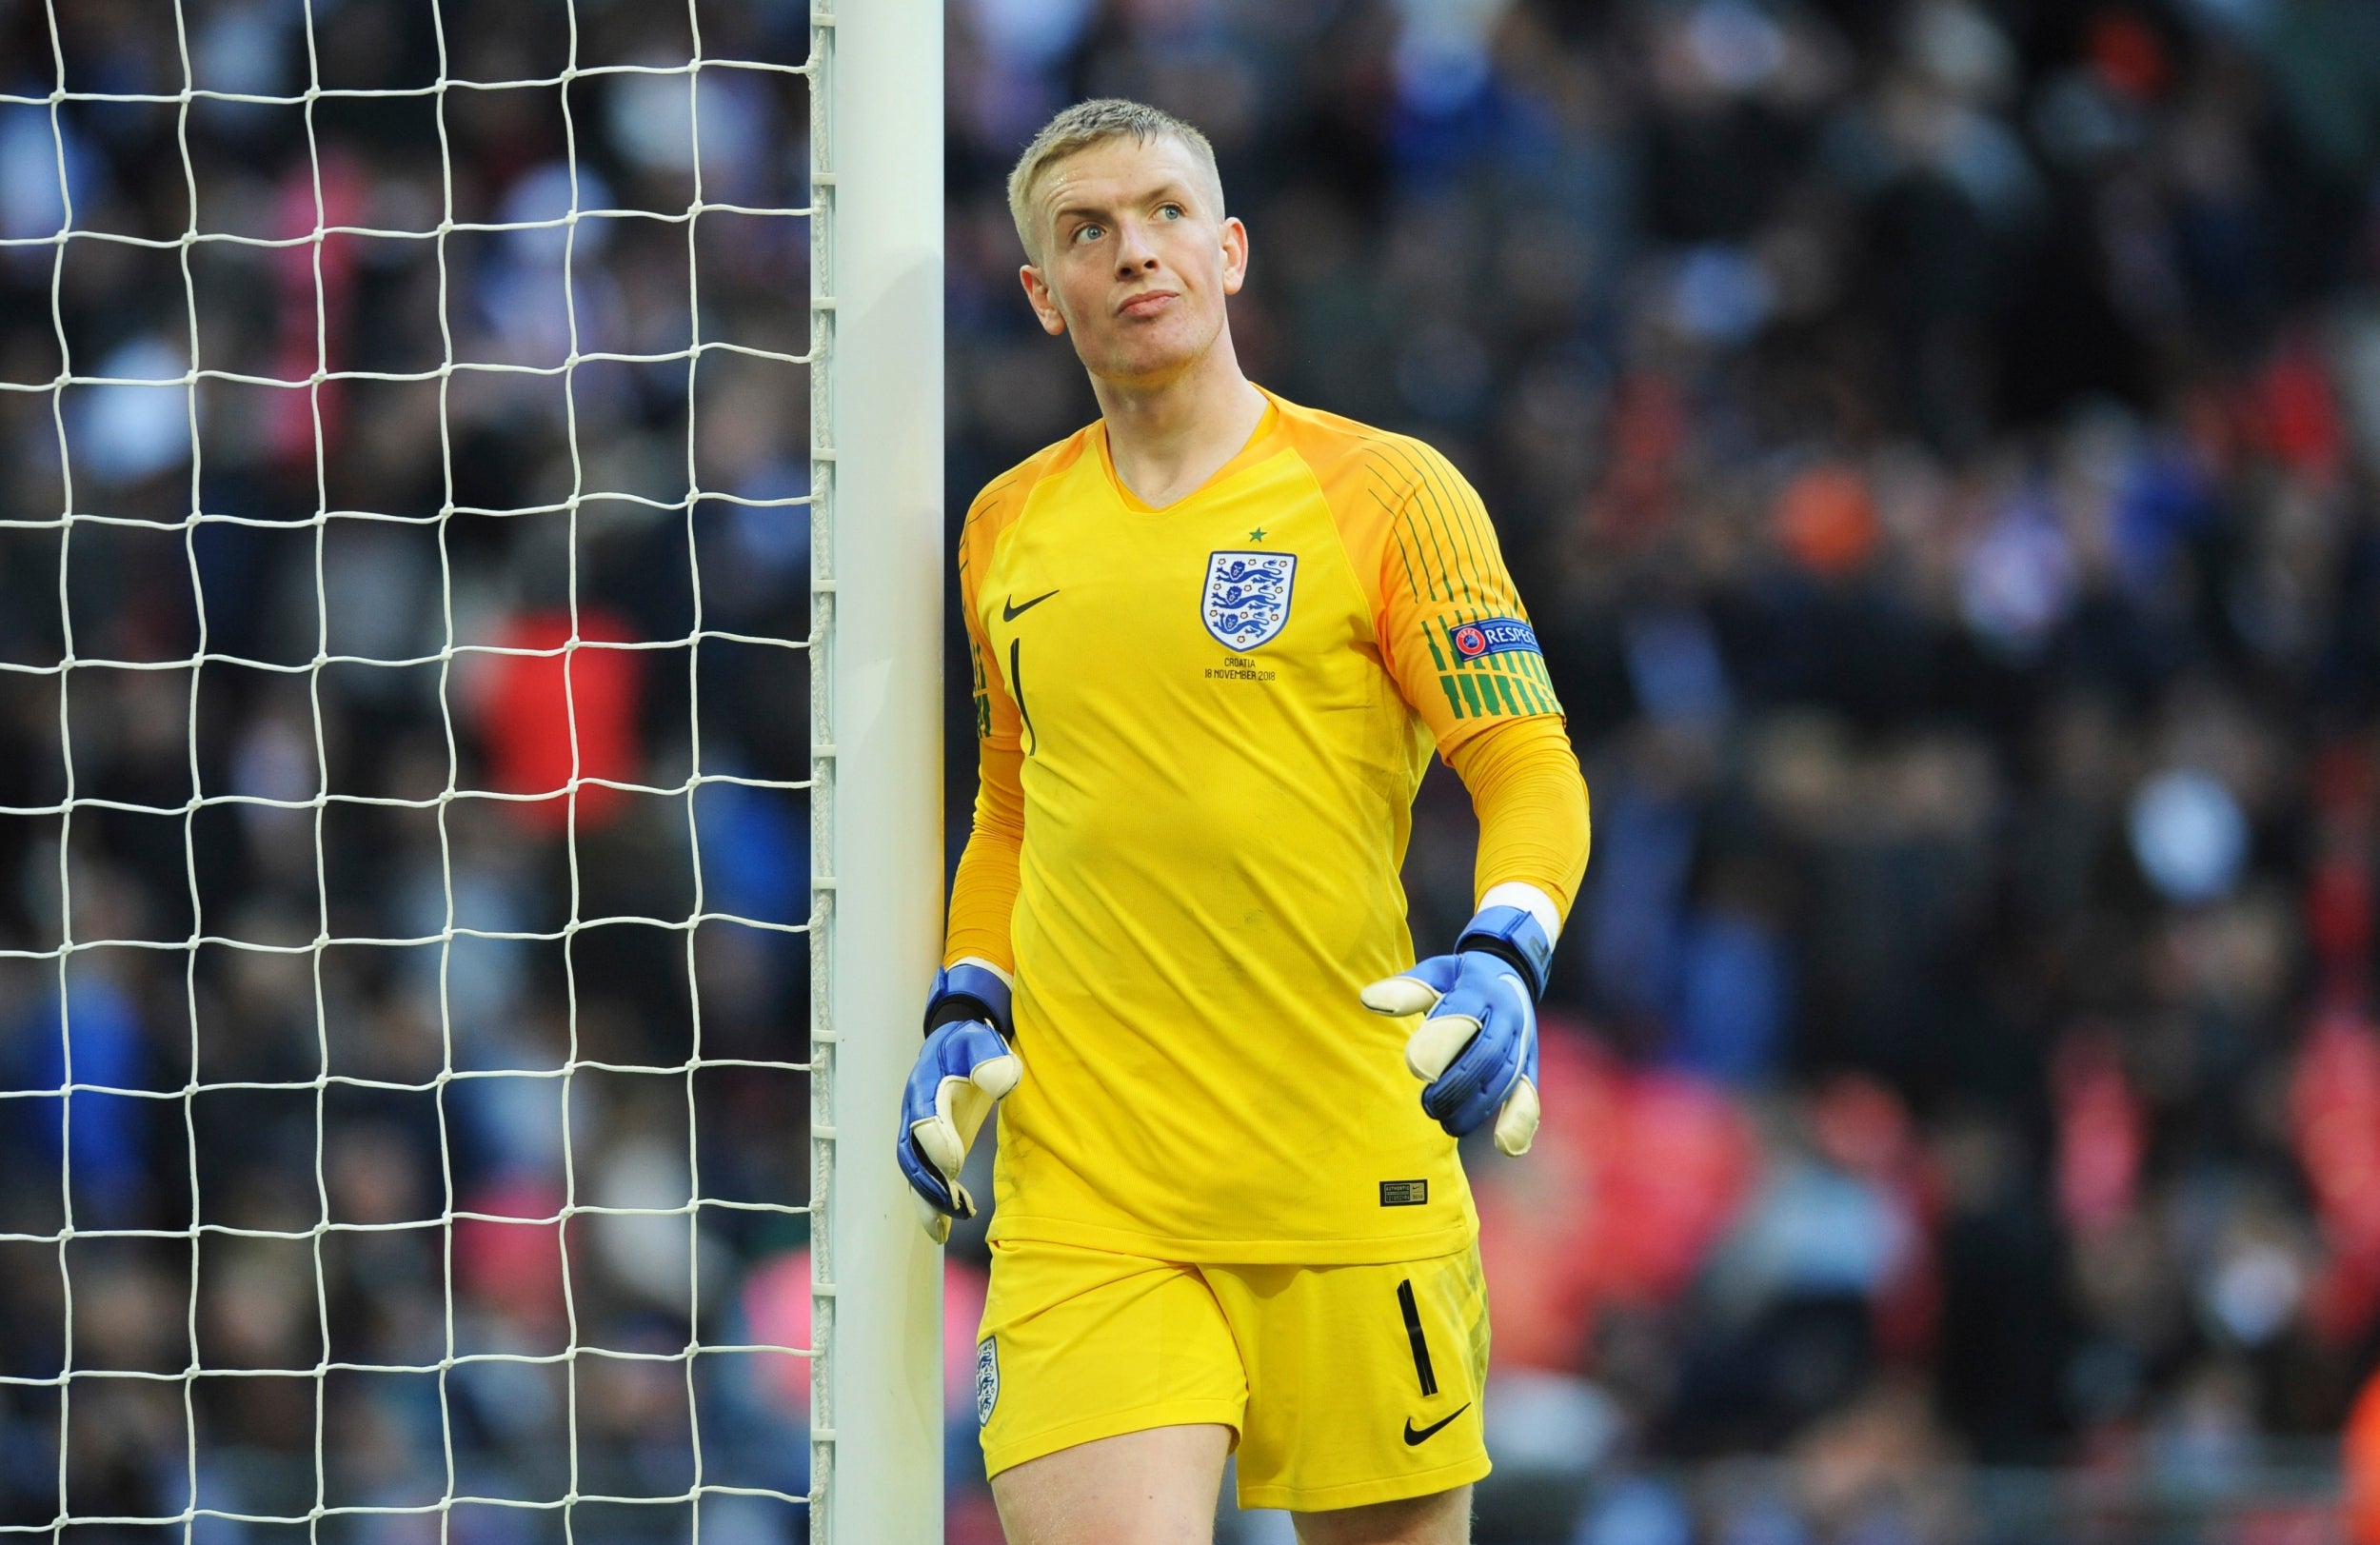 Pickford is England's current first-choice goalkeeper